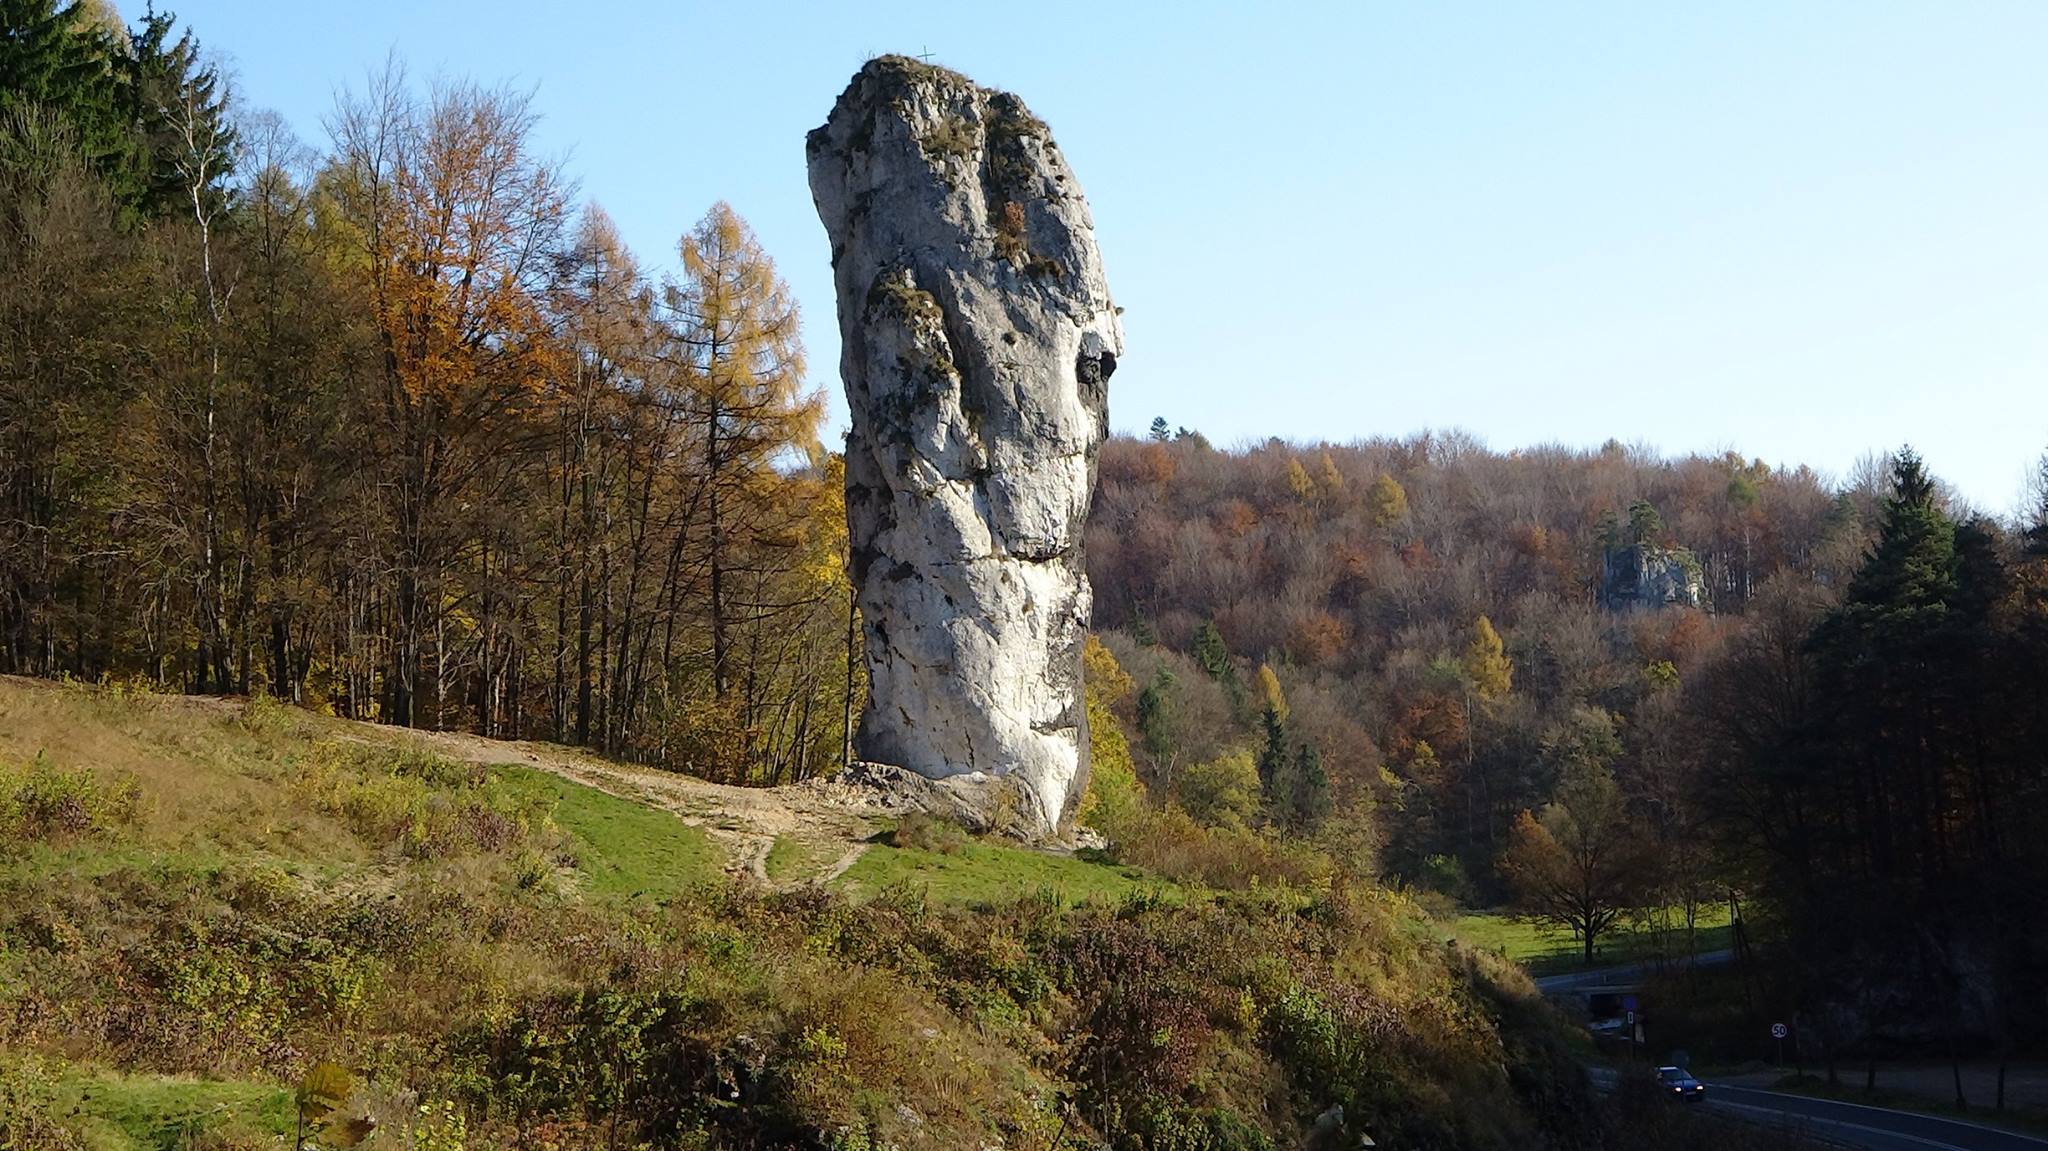 The entire park is characterized by karst topography based on soluble bedrock.